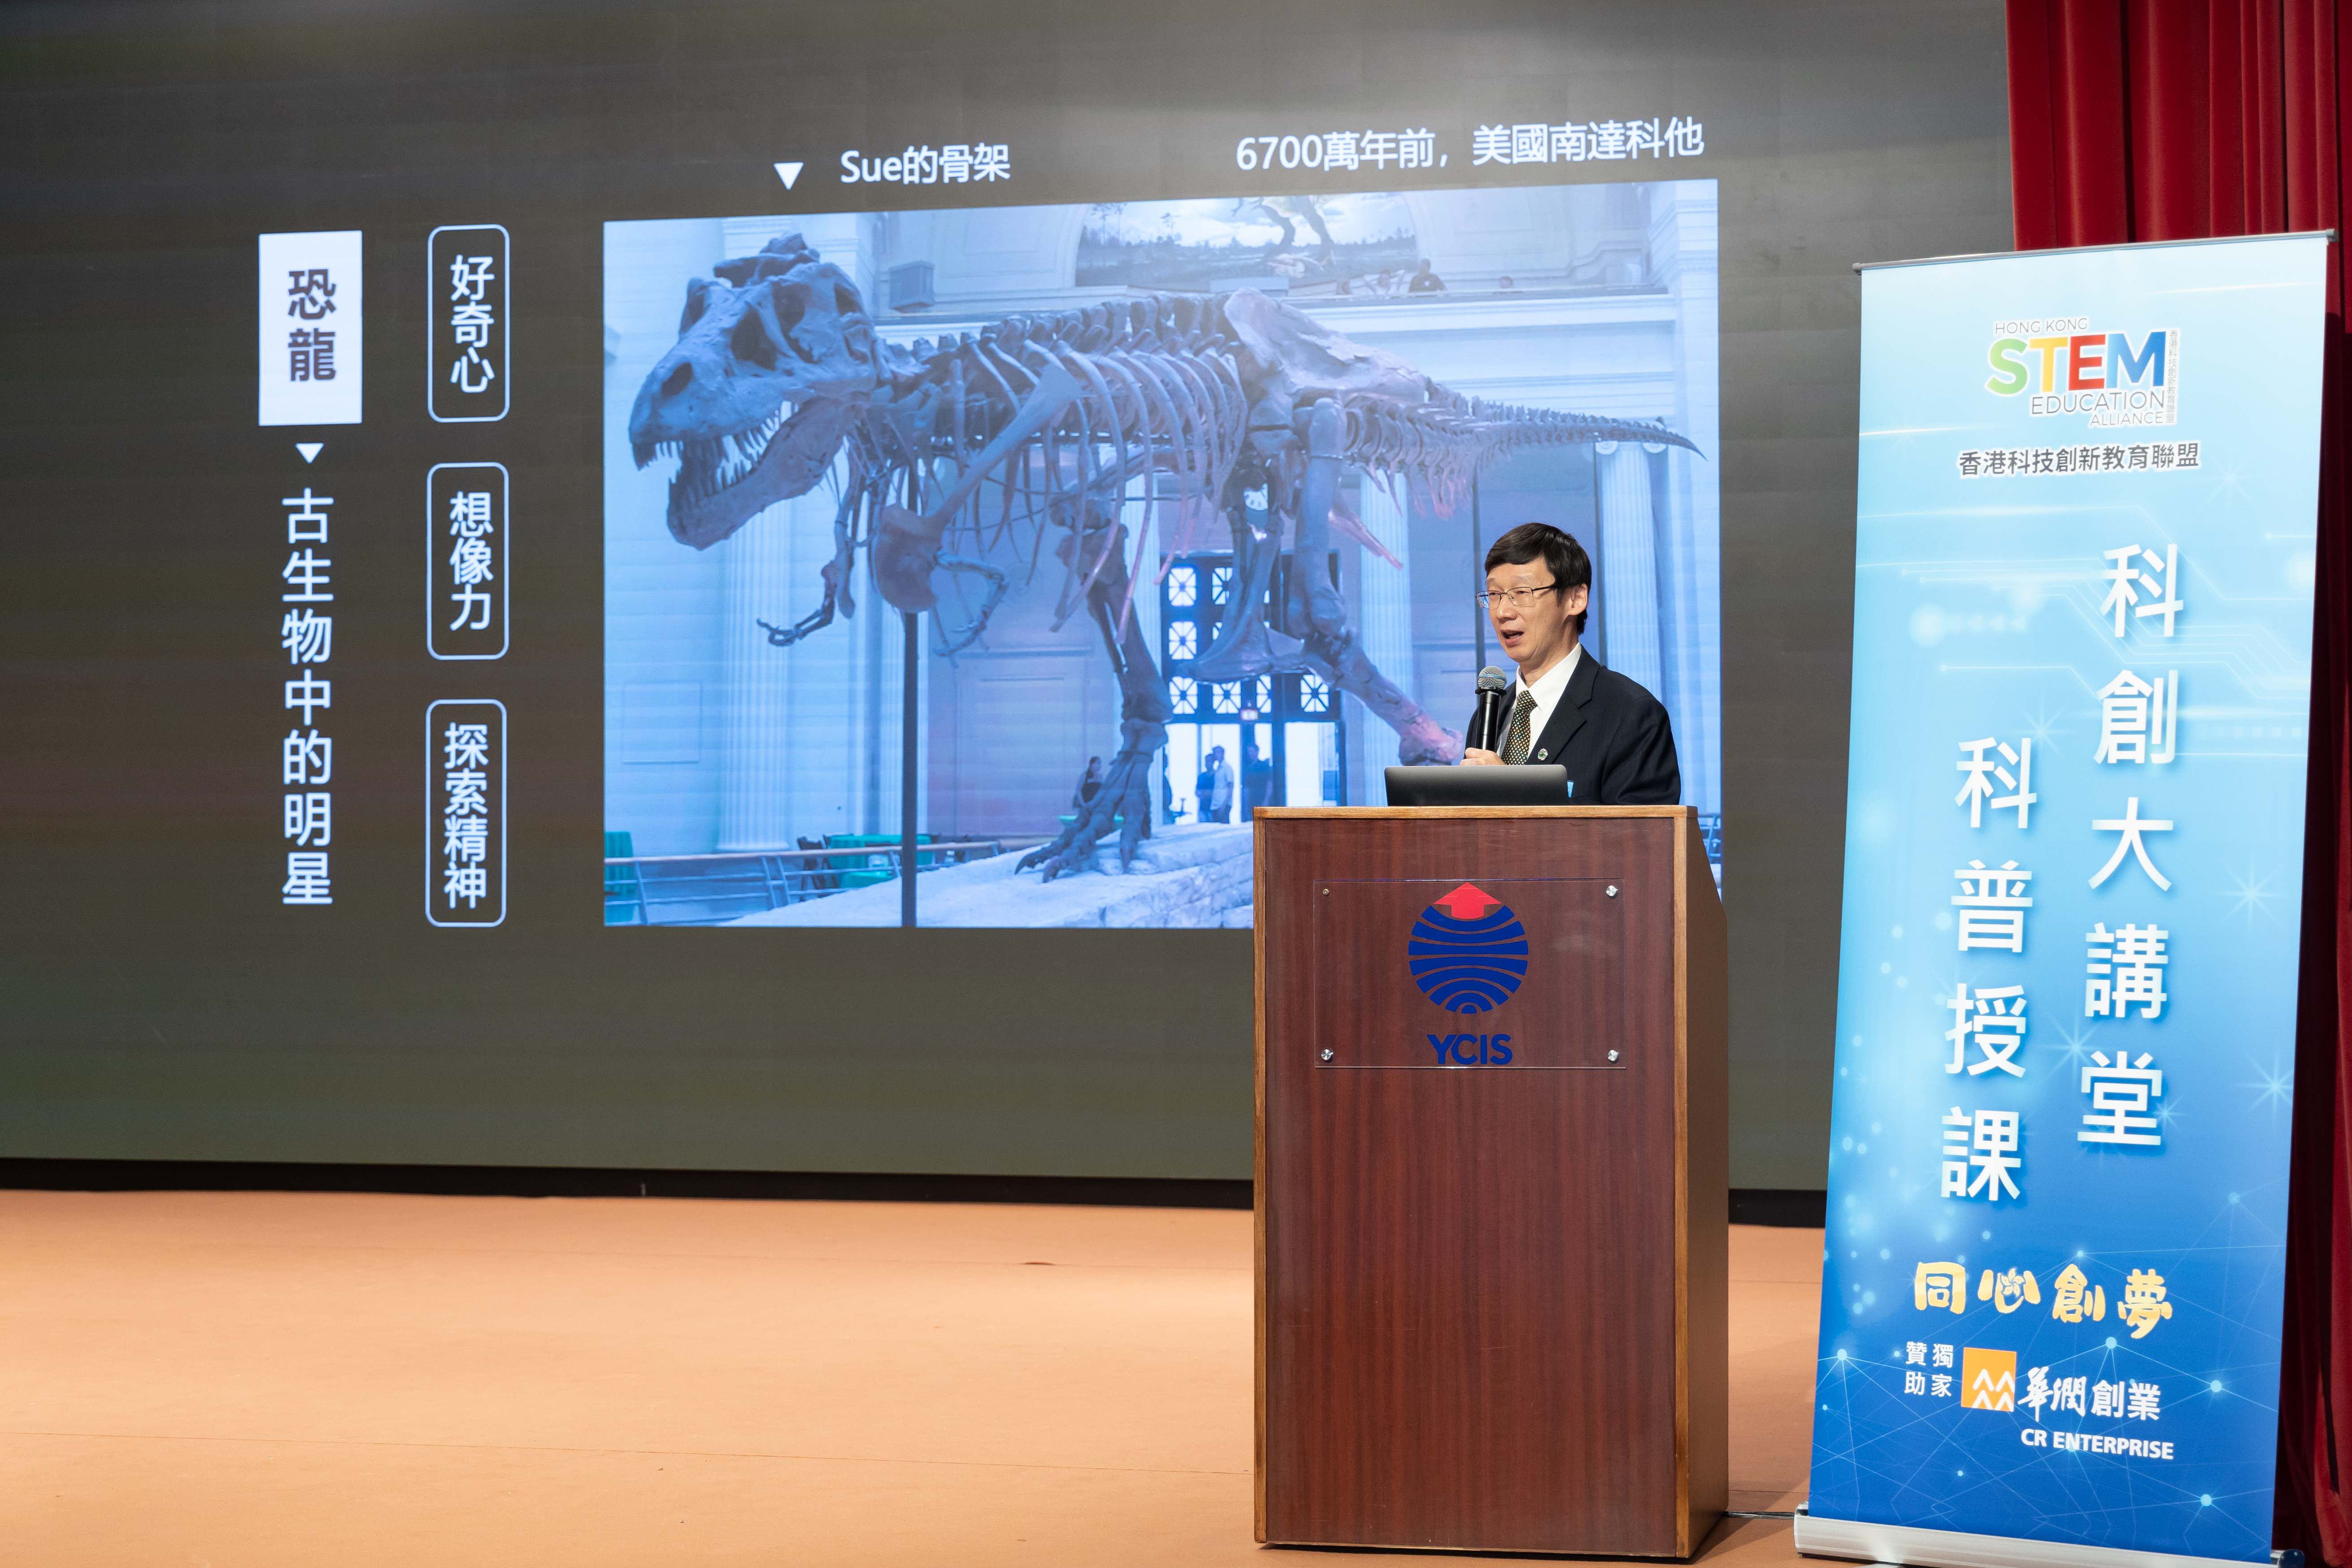 Dr Wang Yuan, a researcher at the Institute of Vertebrate Paleontology and Paleoanthropology of the Chinese Academy of Sciences and the curator of the Paleozoological Museum of China